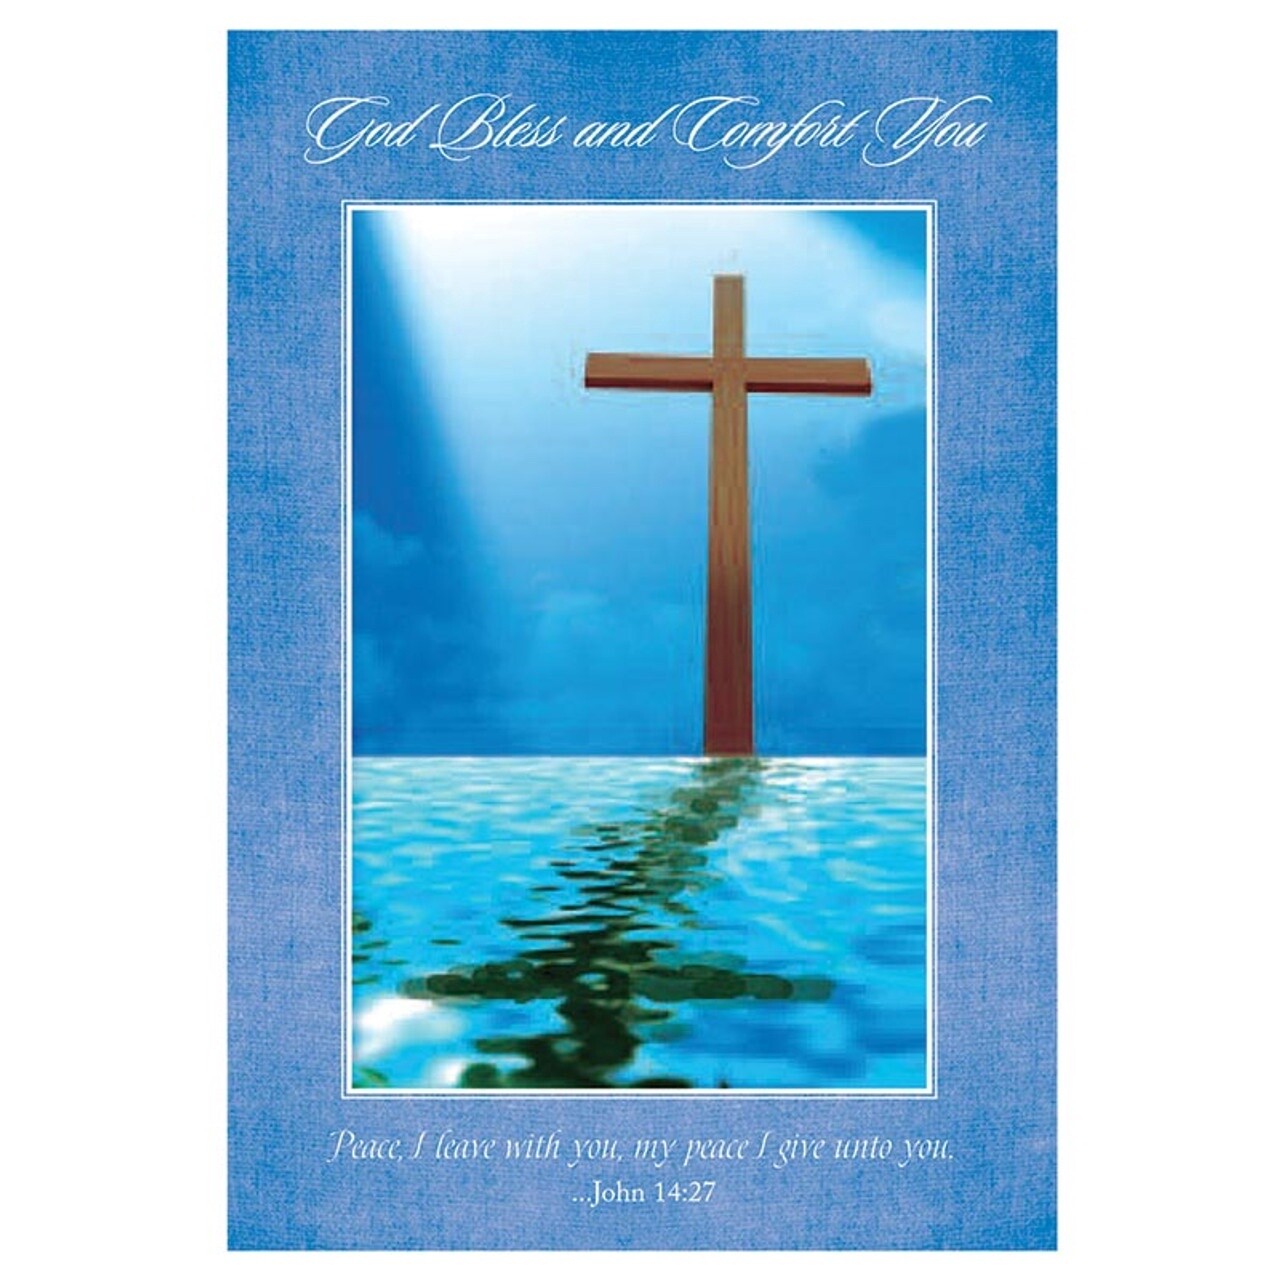 God Bless and Comfort You Encouragement Card